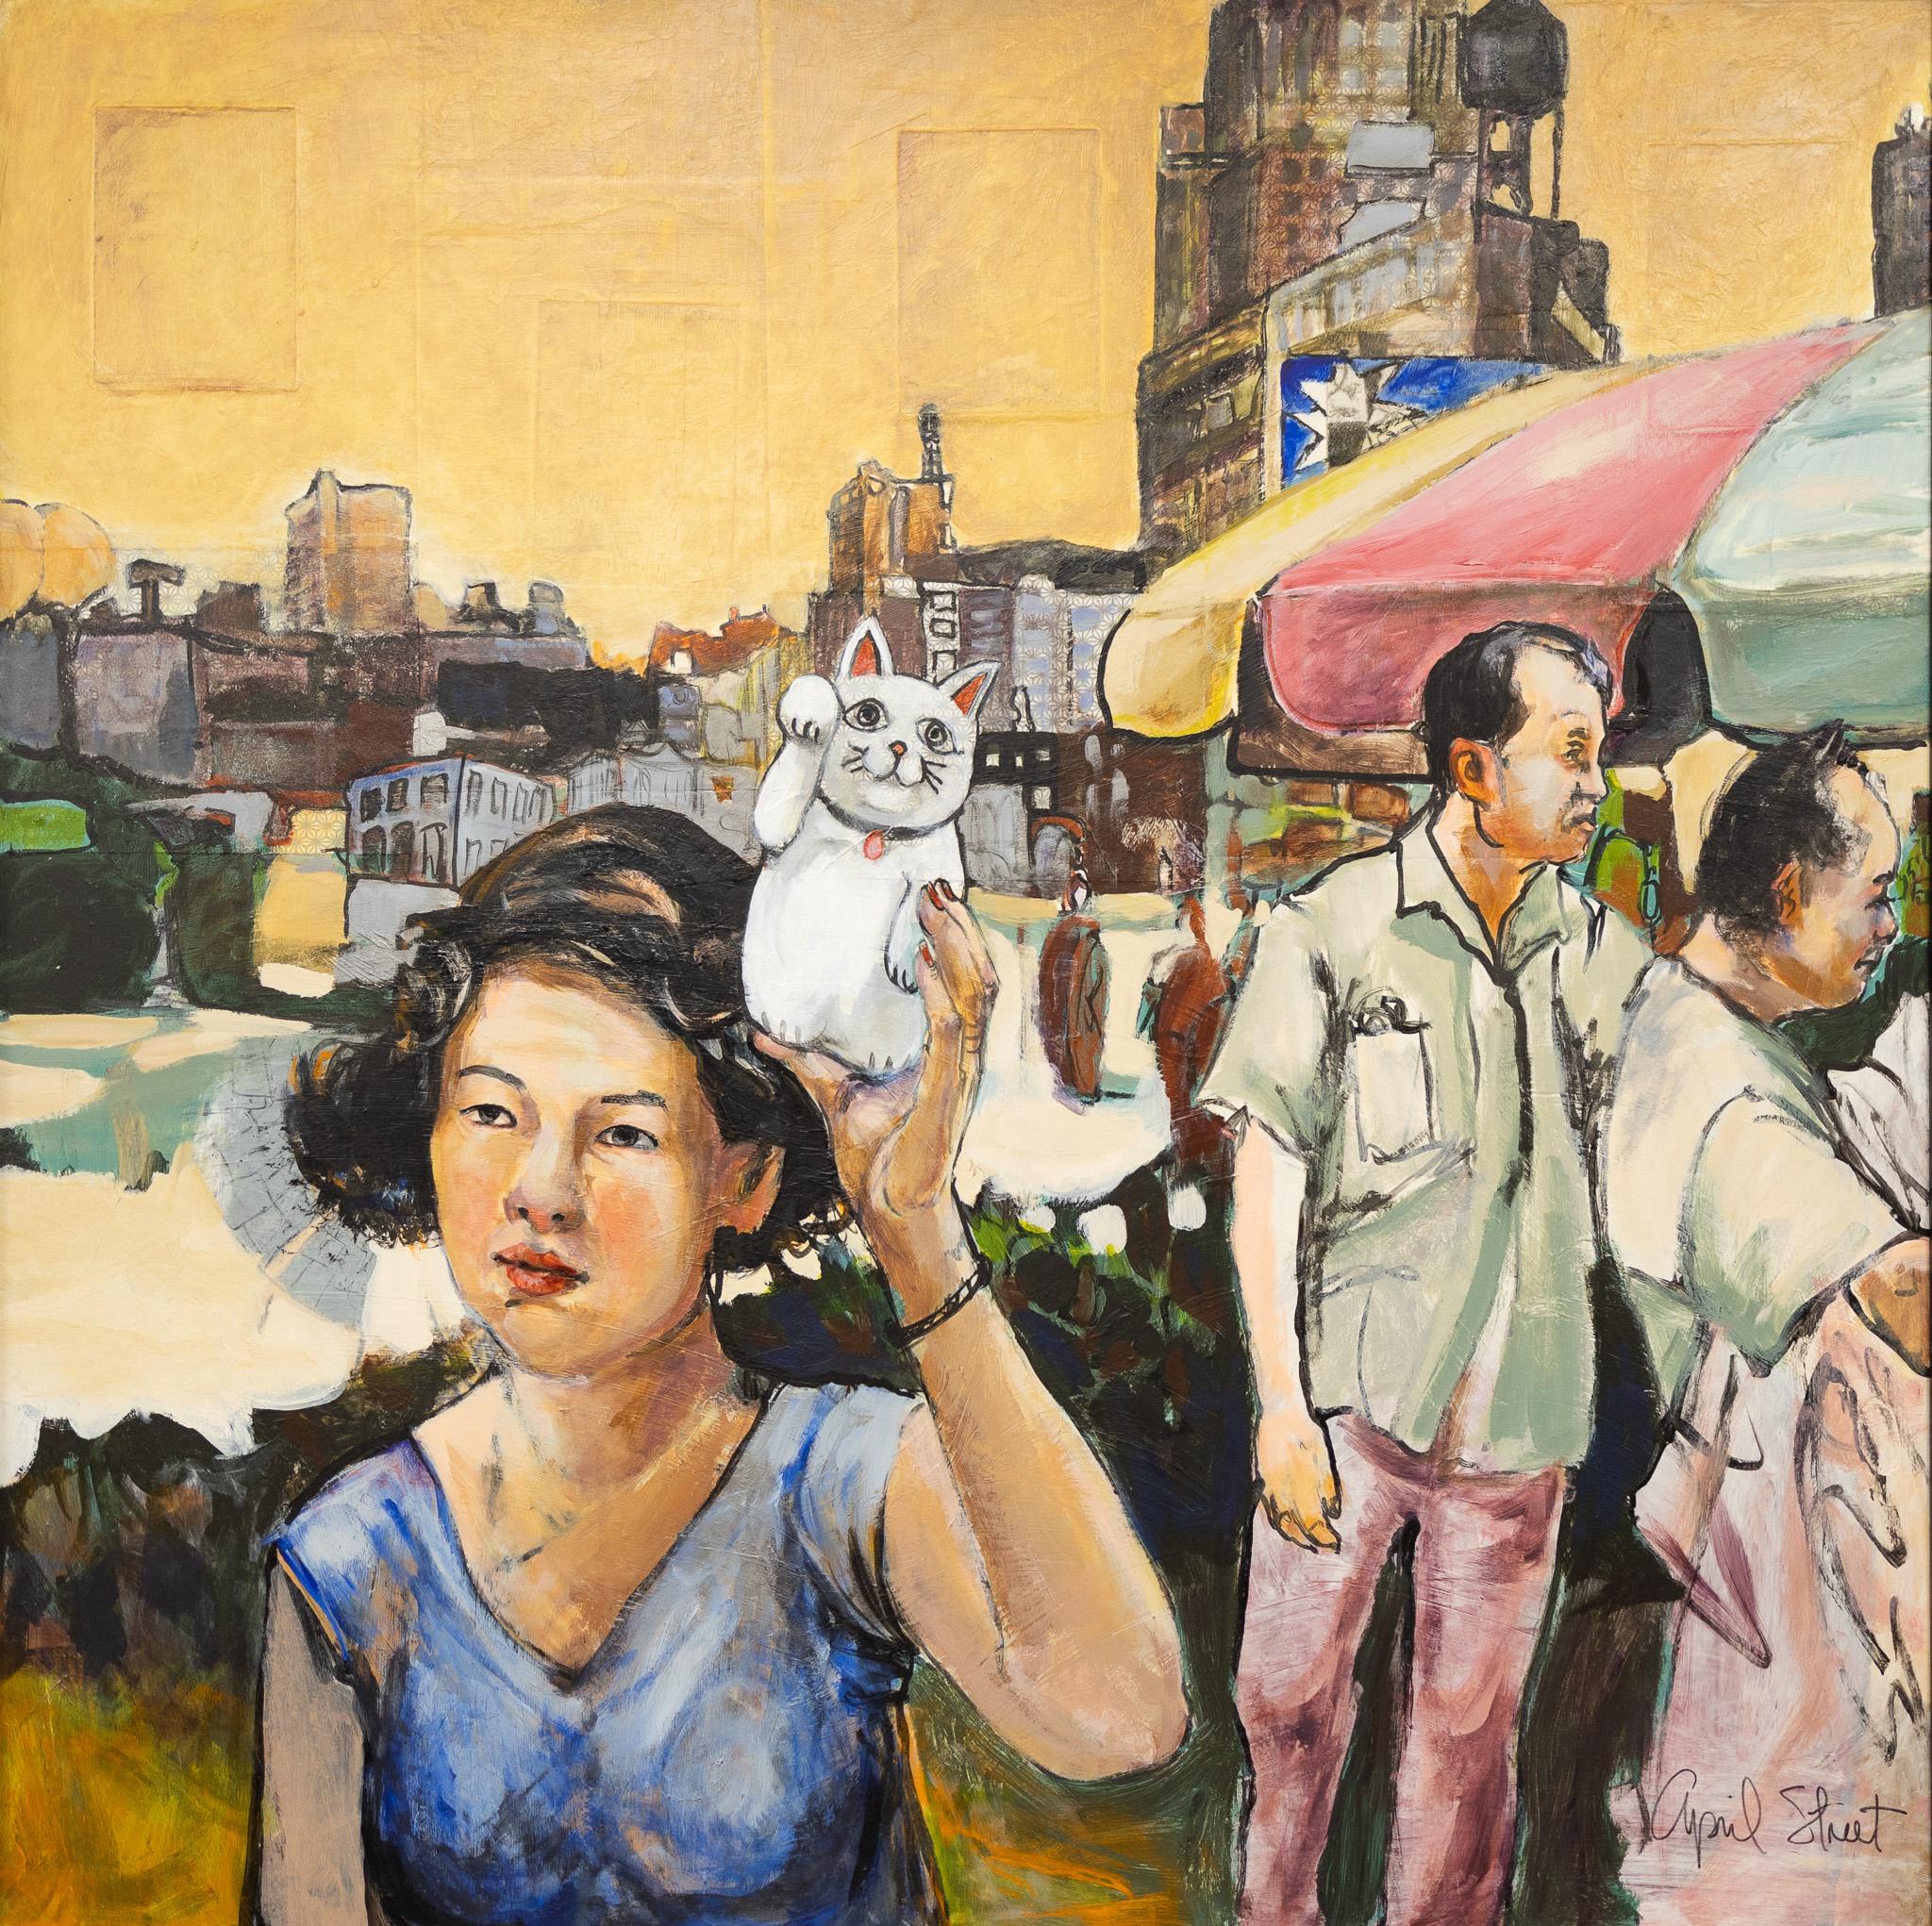 April Street Portrait Painting - "The Water Tower"